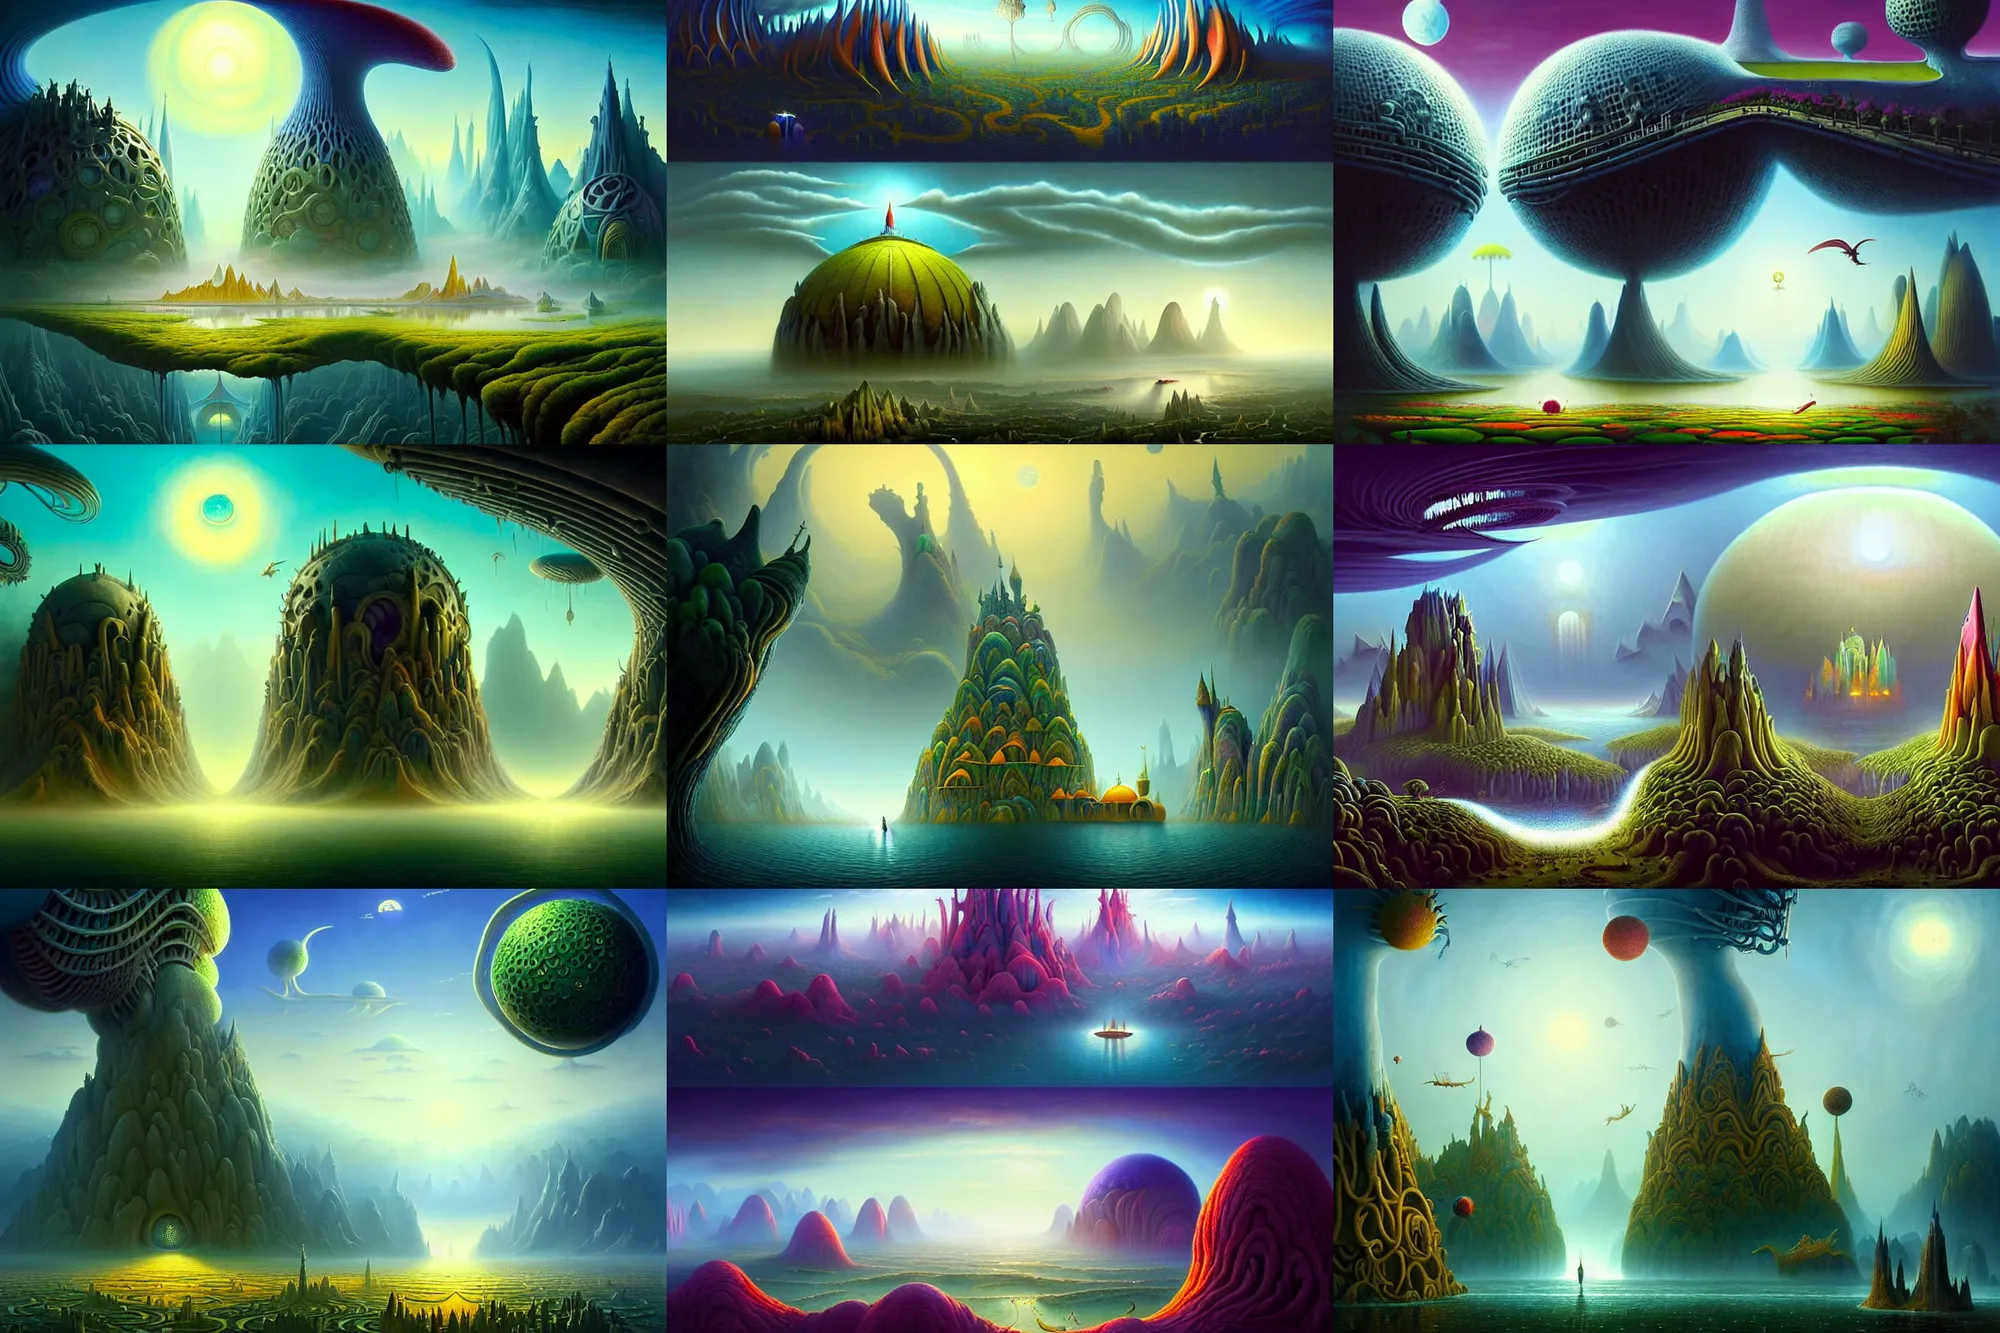 Prompt: a beautiful epic stunning amazing and insanely detailed matte painting of alien dream worlds with surreal architecture designed by Heironymous Bosch, mega structures inspired by Heironymous Bosch's Garden of Earthly Delights, vast surreal landscape and horizon by Asher Durand and Cyril Rolando and Gerald Brom and Filip Hodas, rich pastel color palette, masterpiece!!, grand!, imaginative!!!, whimsical!!, epic scale, intricate details, sense of awe, elite, fantasy realism, complex composition, 4k post processing